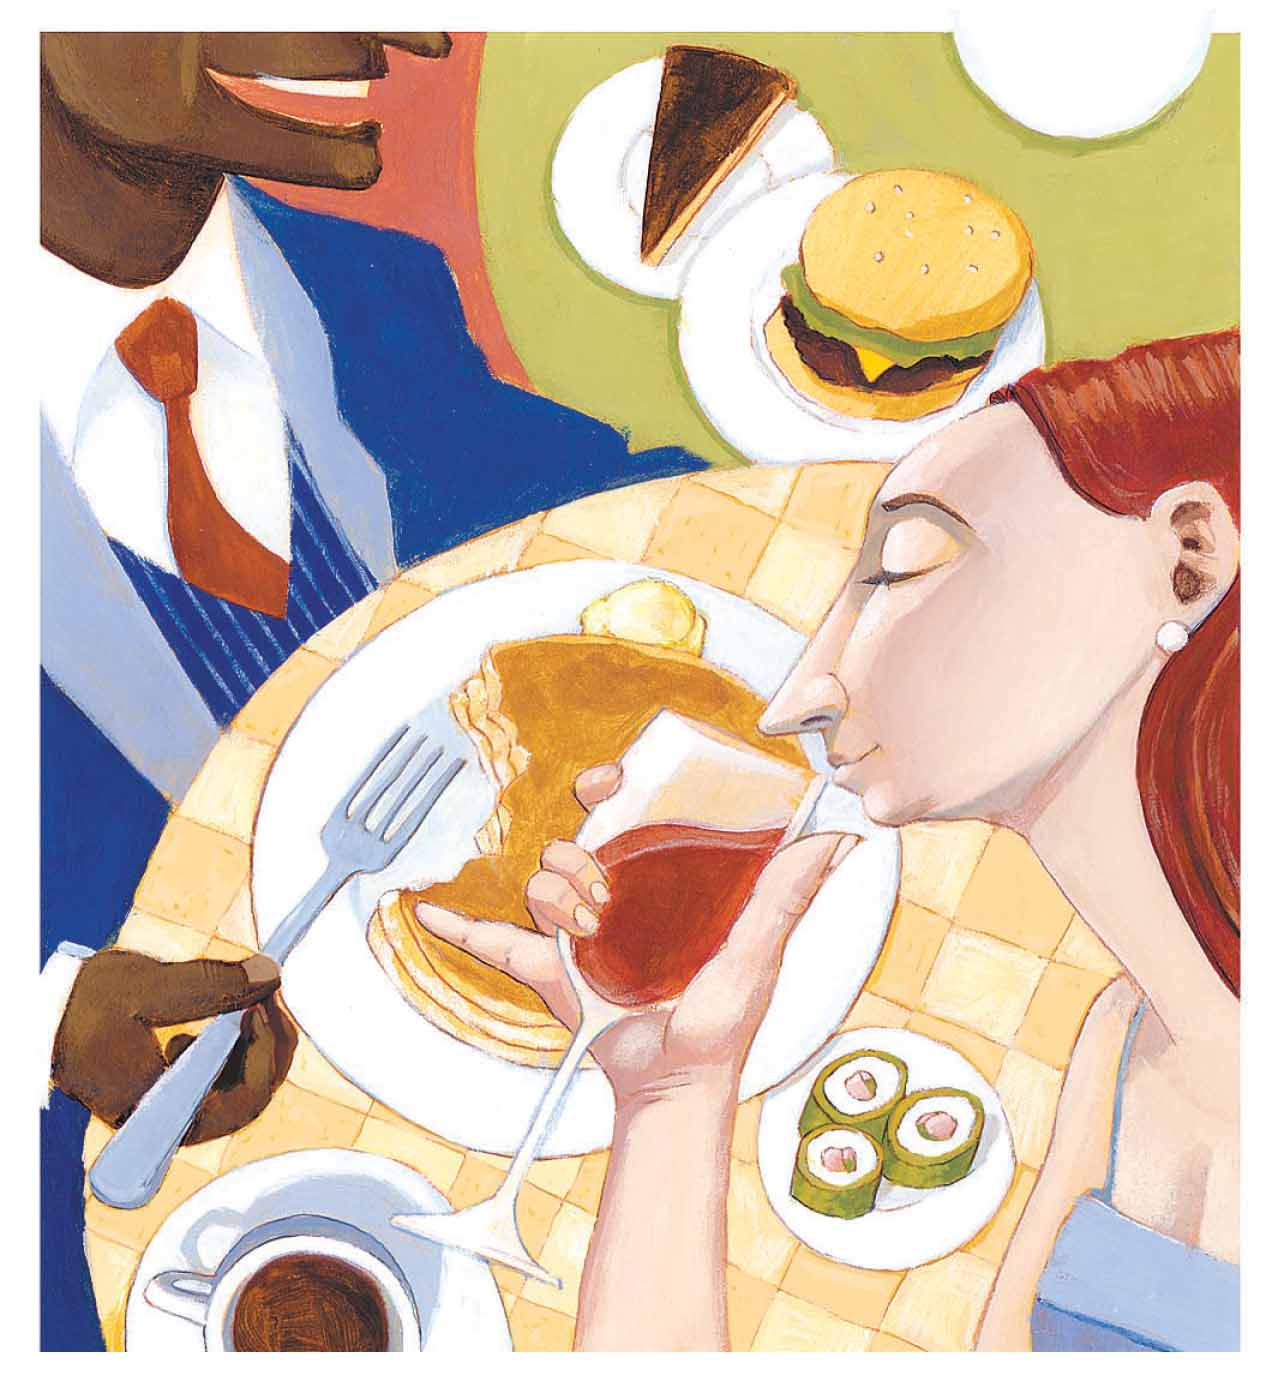 Illustration of two people eating dinnner with a variety of different dishes on the tables.